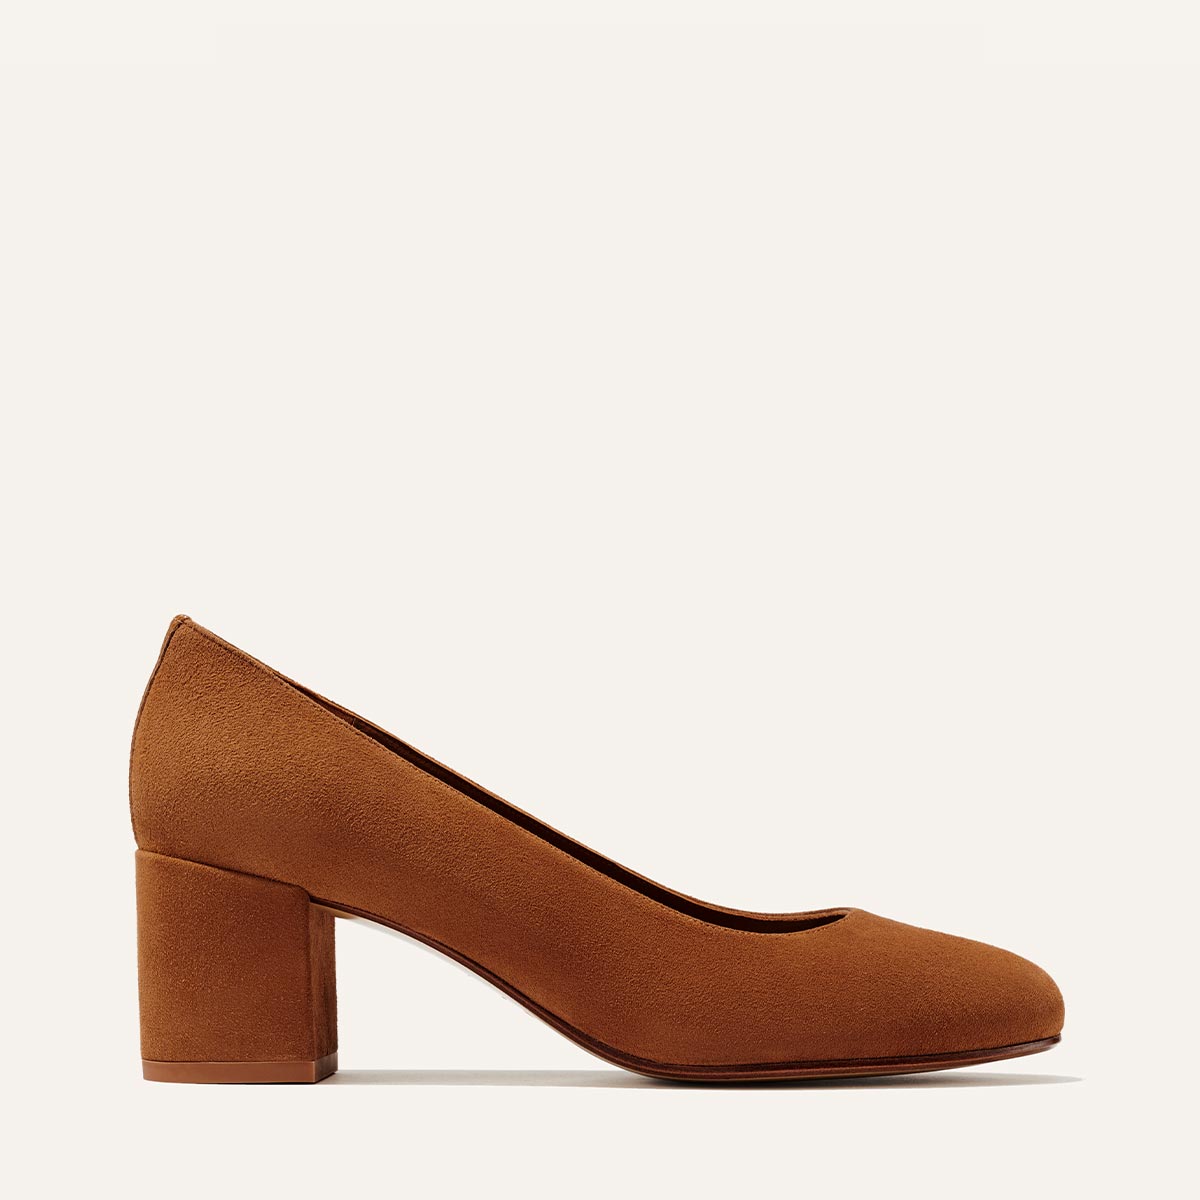 Margaux's classic and comfortable workwear Heel, made in Spain from soft, chestnut brown Italian suede